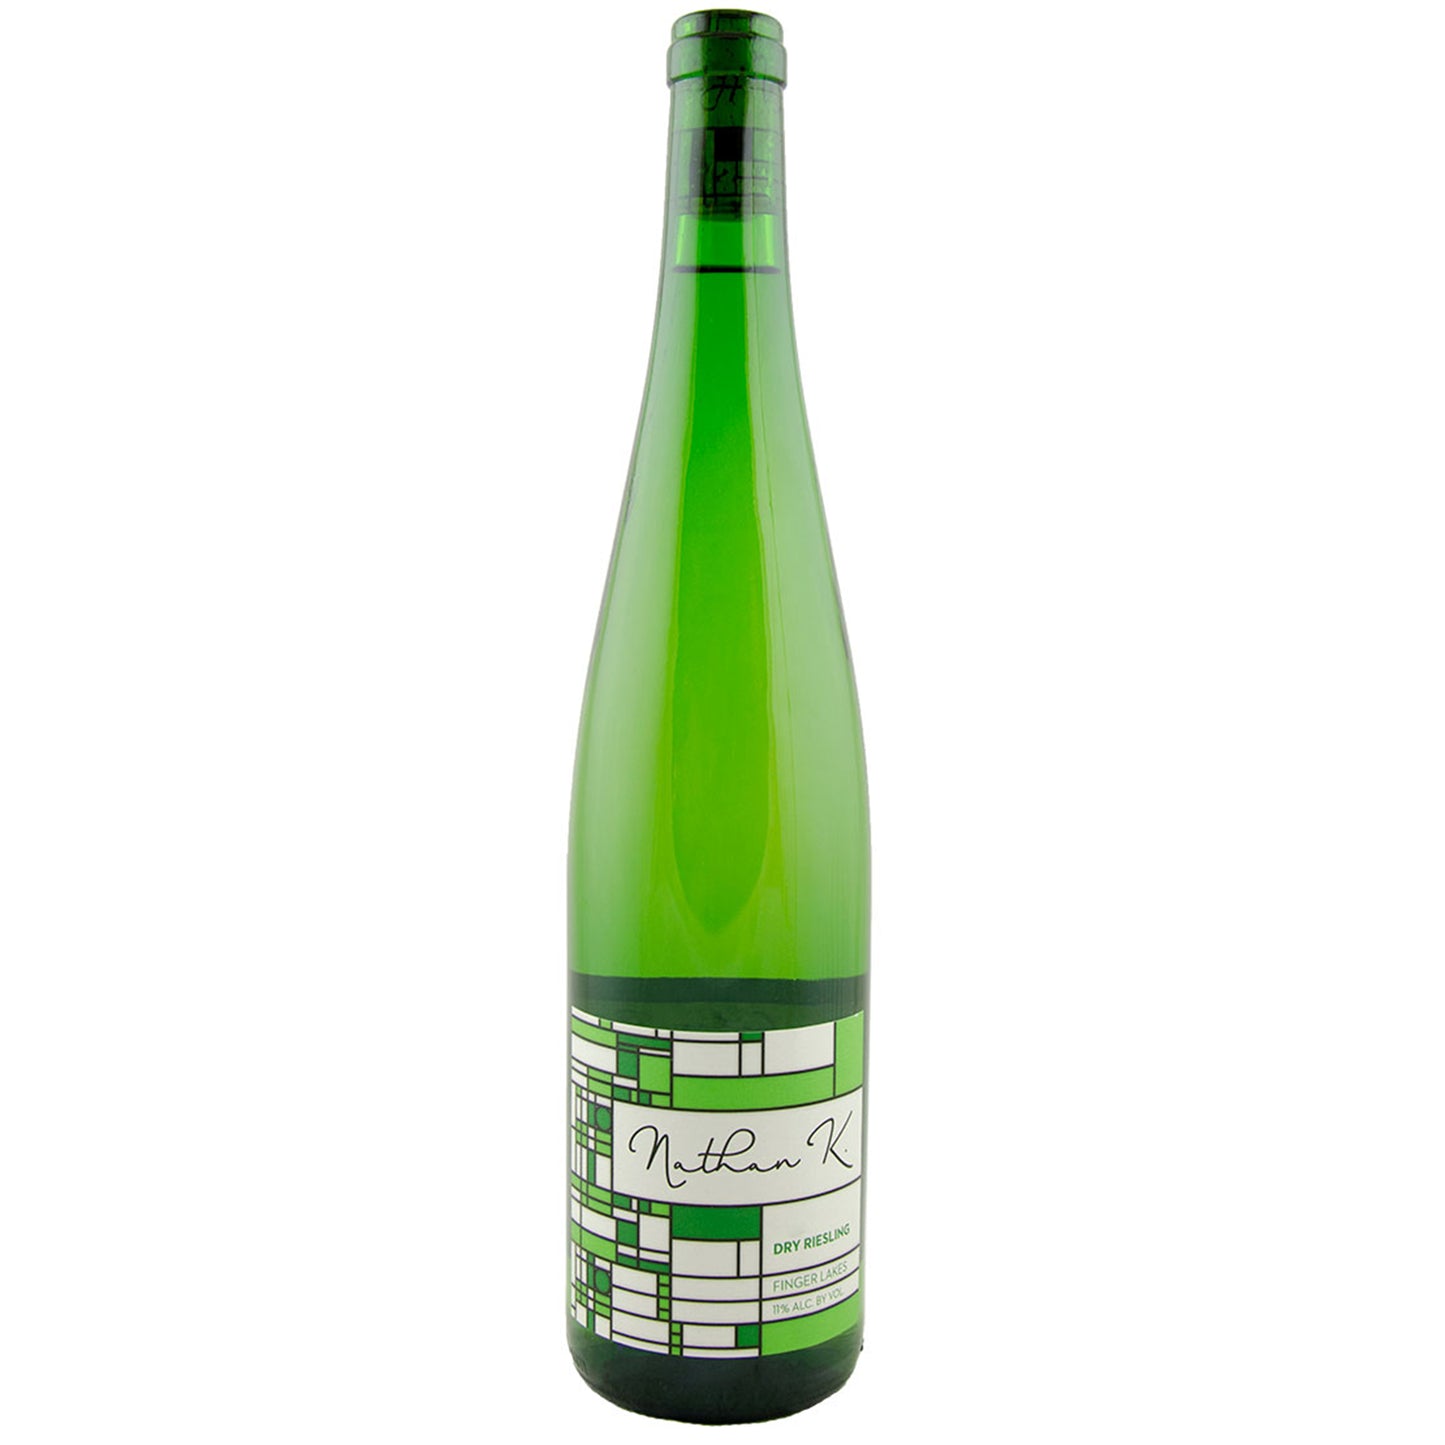 Nathan Kendall Dry Riesling 2019 (750 ml)